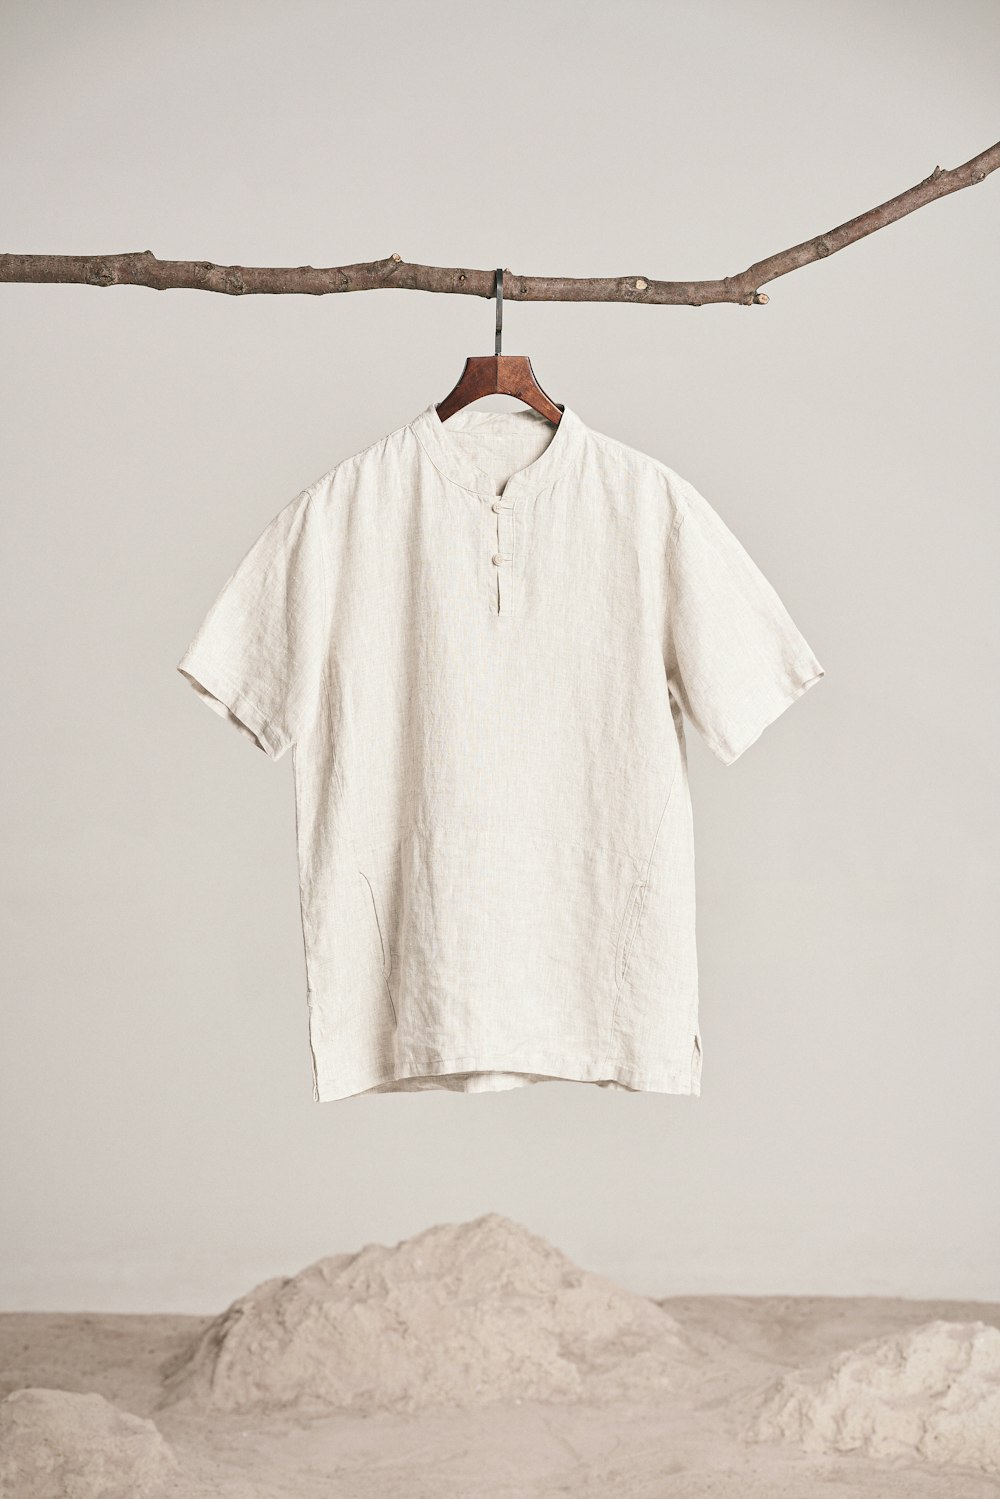 a white shirt hanging on a clothes line